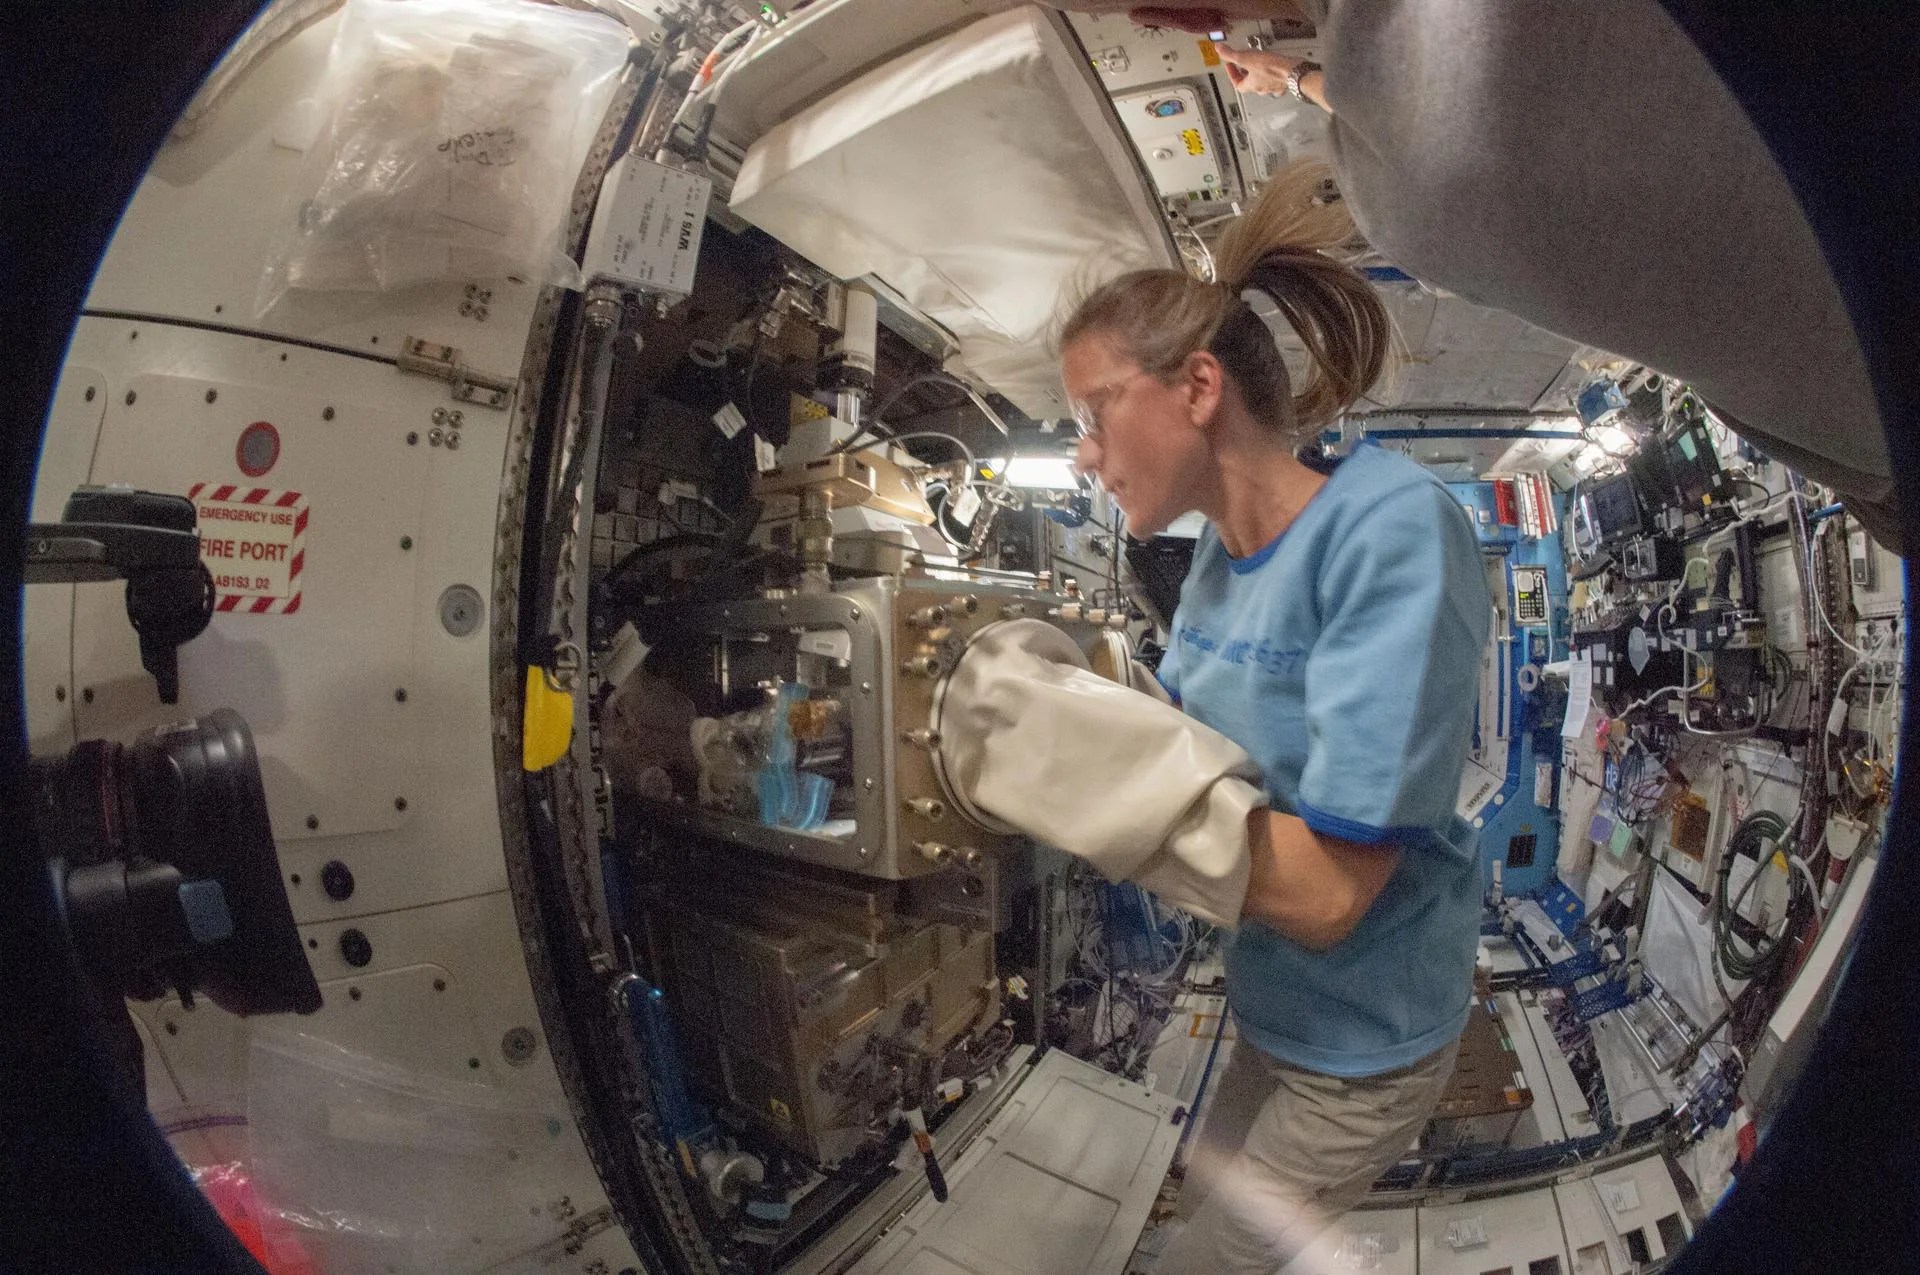 A photo of NASA astronaut Karen Nyberg conducting a session with the Advanced Colloids Experiment (ACE)-1 sample preparation at the Light Microscopy Module in the Fluids Integrated Rack / Fluids Combustion Facility.